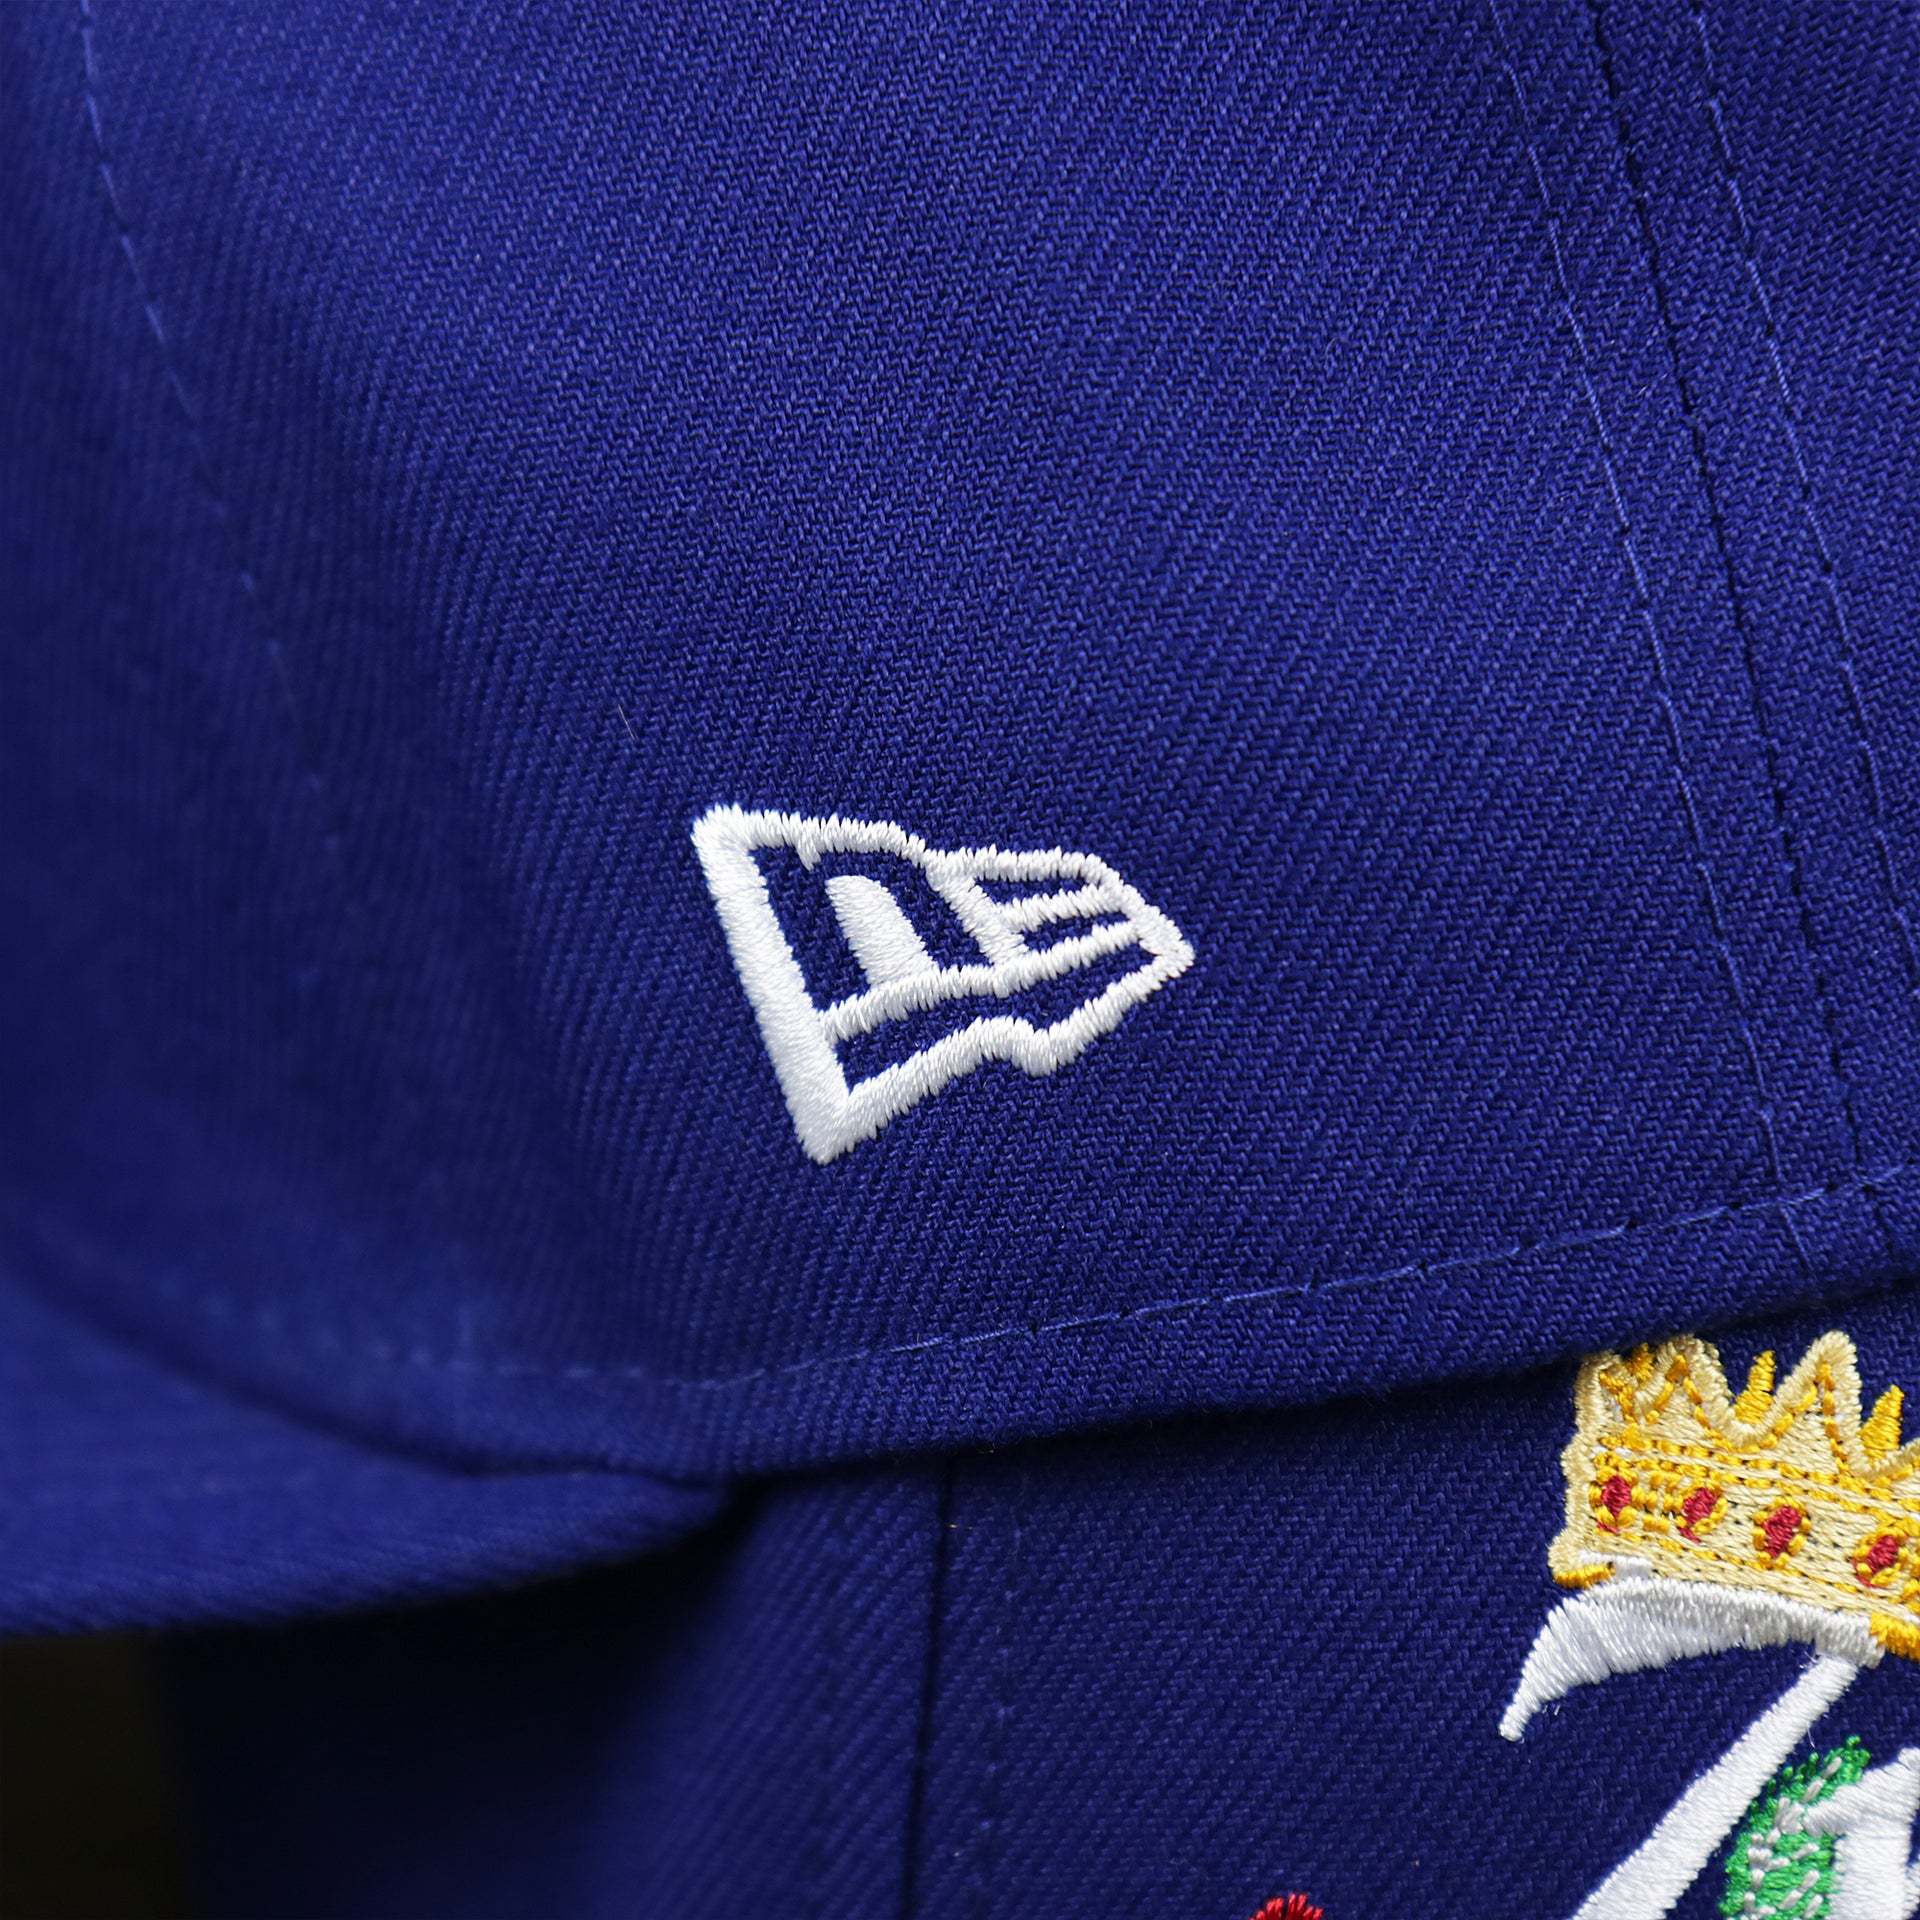 The New Era Logo on the Los Angeles Dodgers Crown Champions Gray Bottom World Championship Wins Embroidered Fitted Cap | Royal Blue 59Fifty Cap